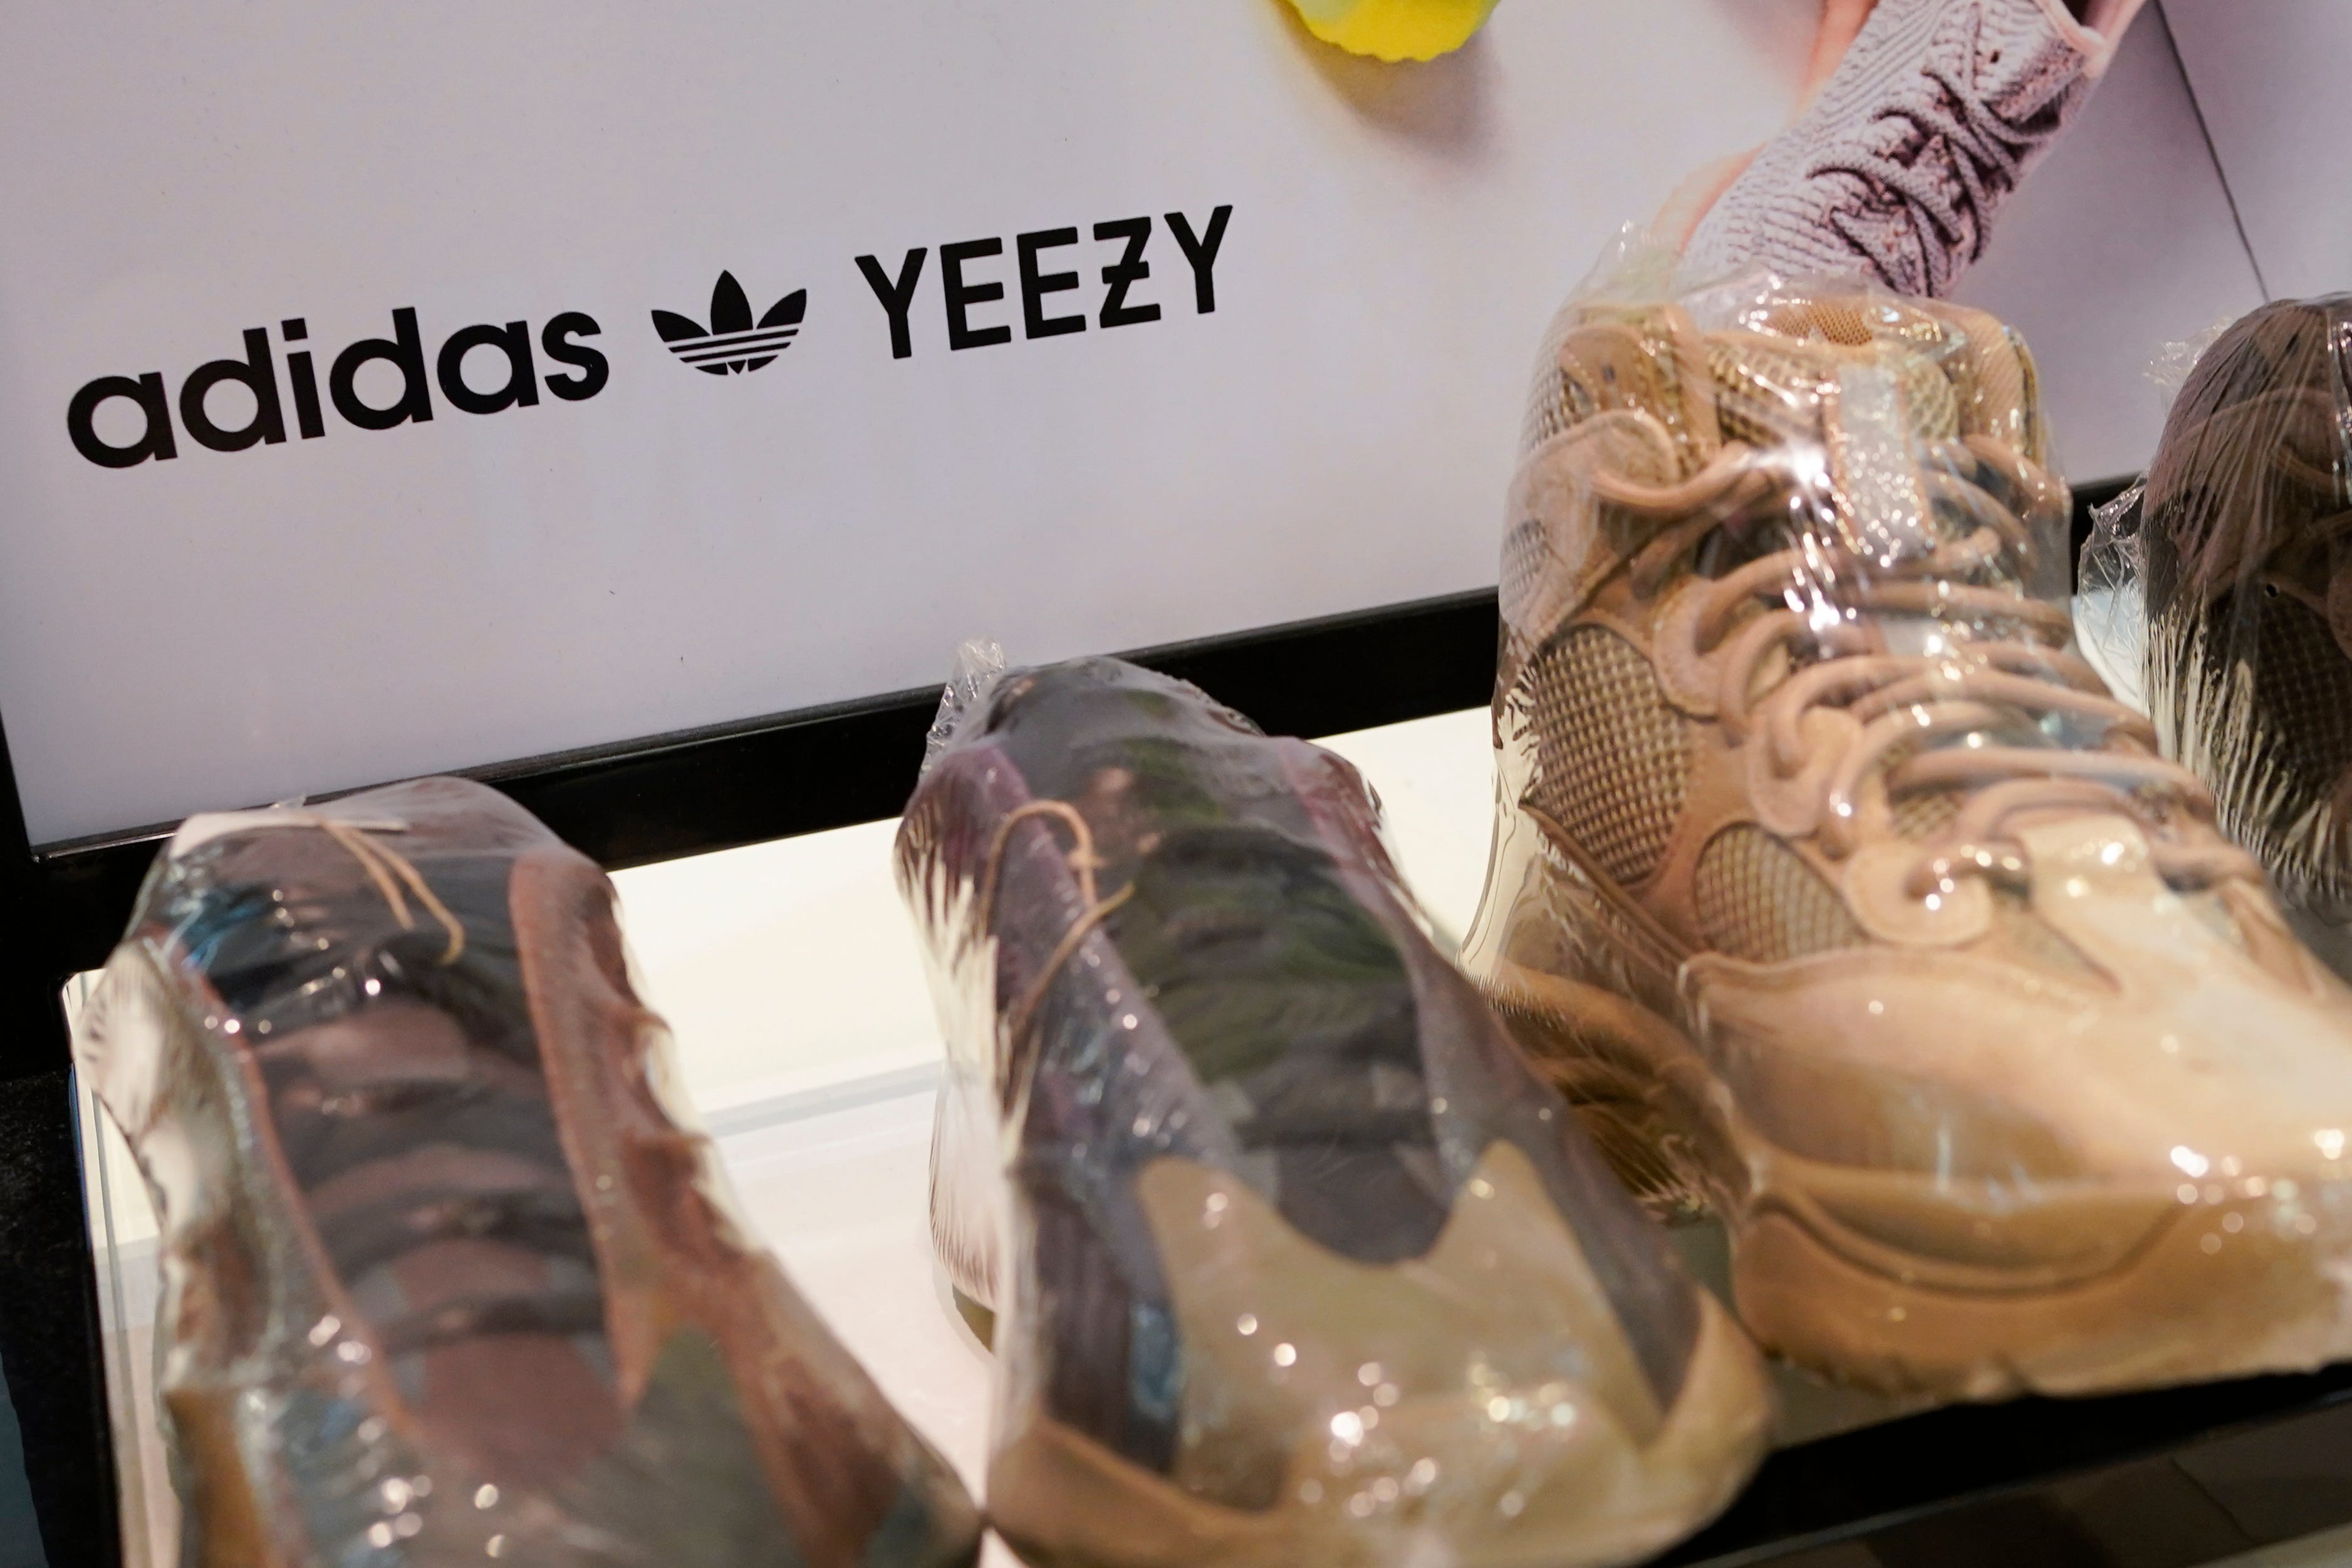 Adidas says Yeezy shoes could cost over $1 billion